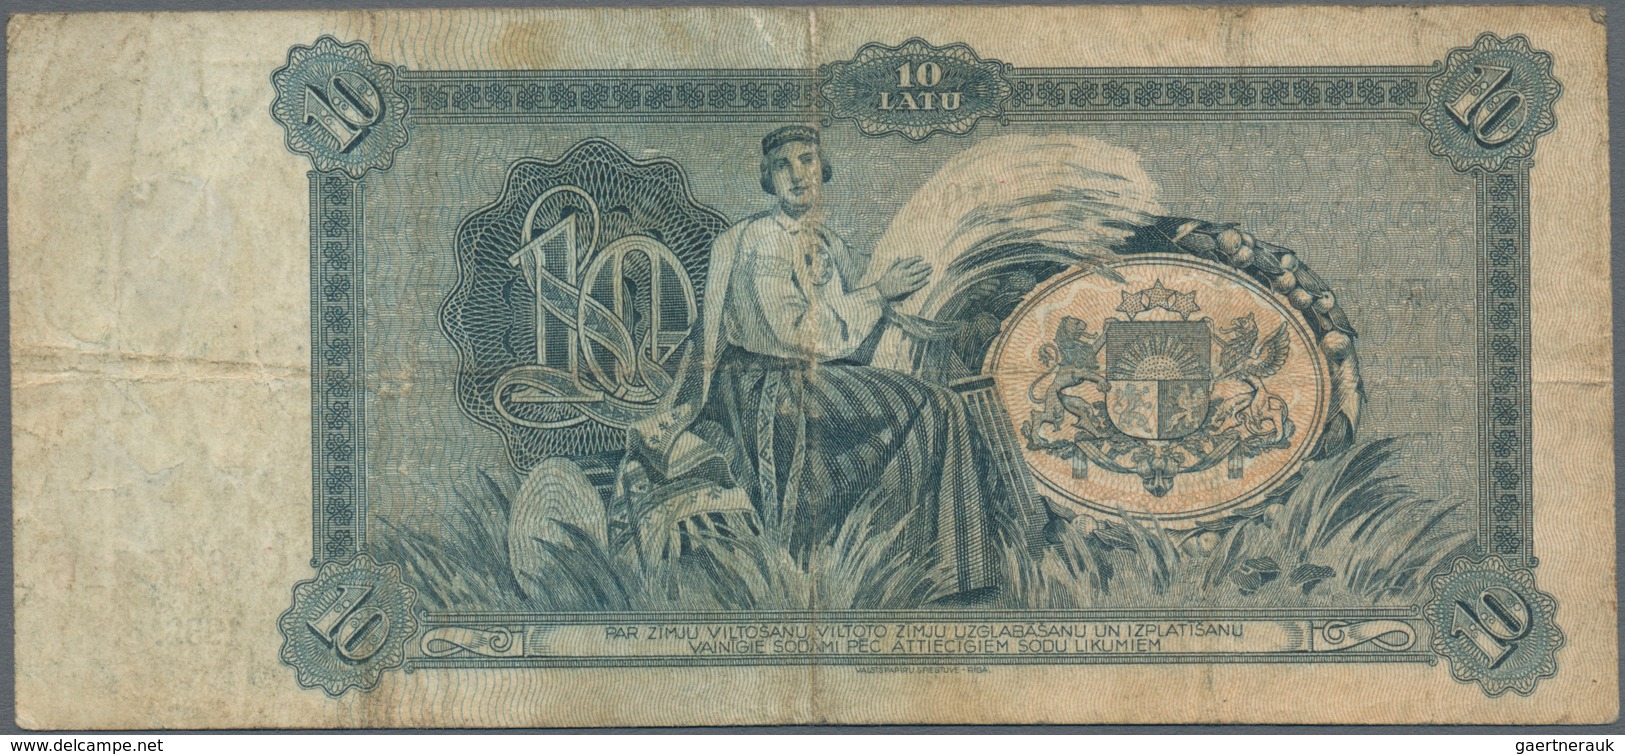 Latvia / Lettland: Set Of 2 Notes Containing 10 Latu 1933 & 1934 P. 24a, 25f, Both Used With Folds A - Letonia